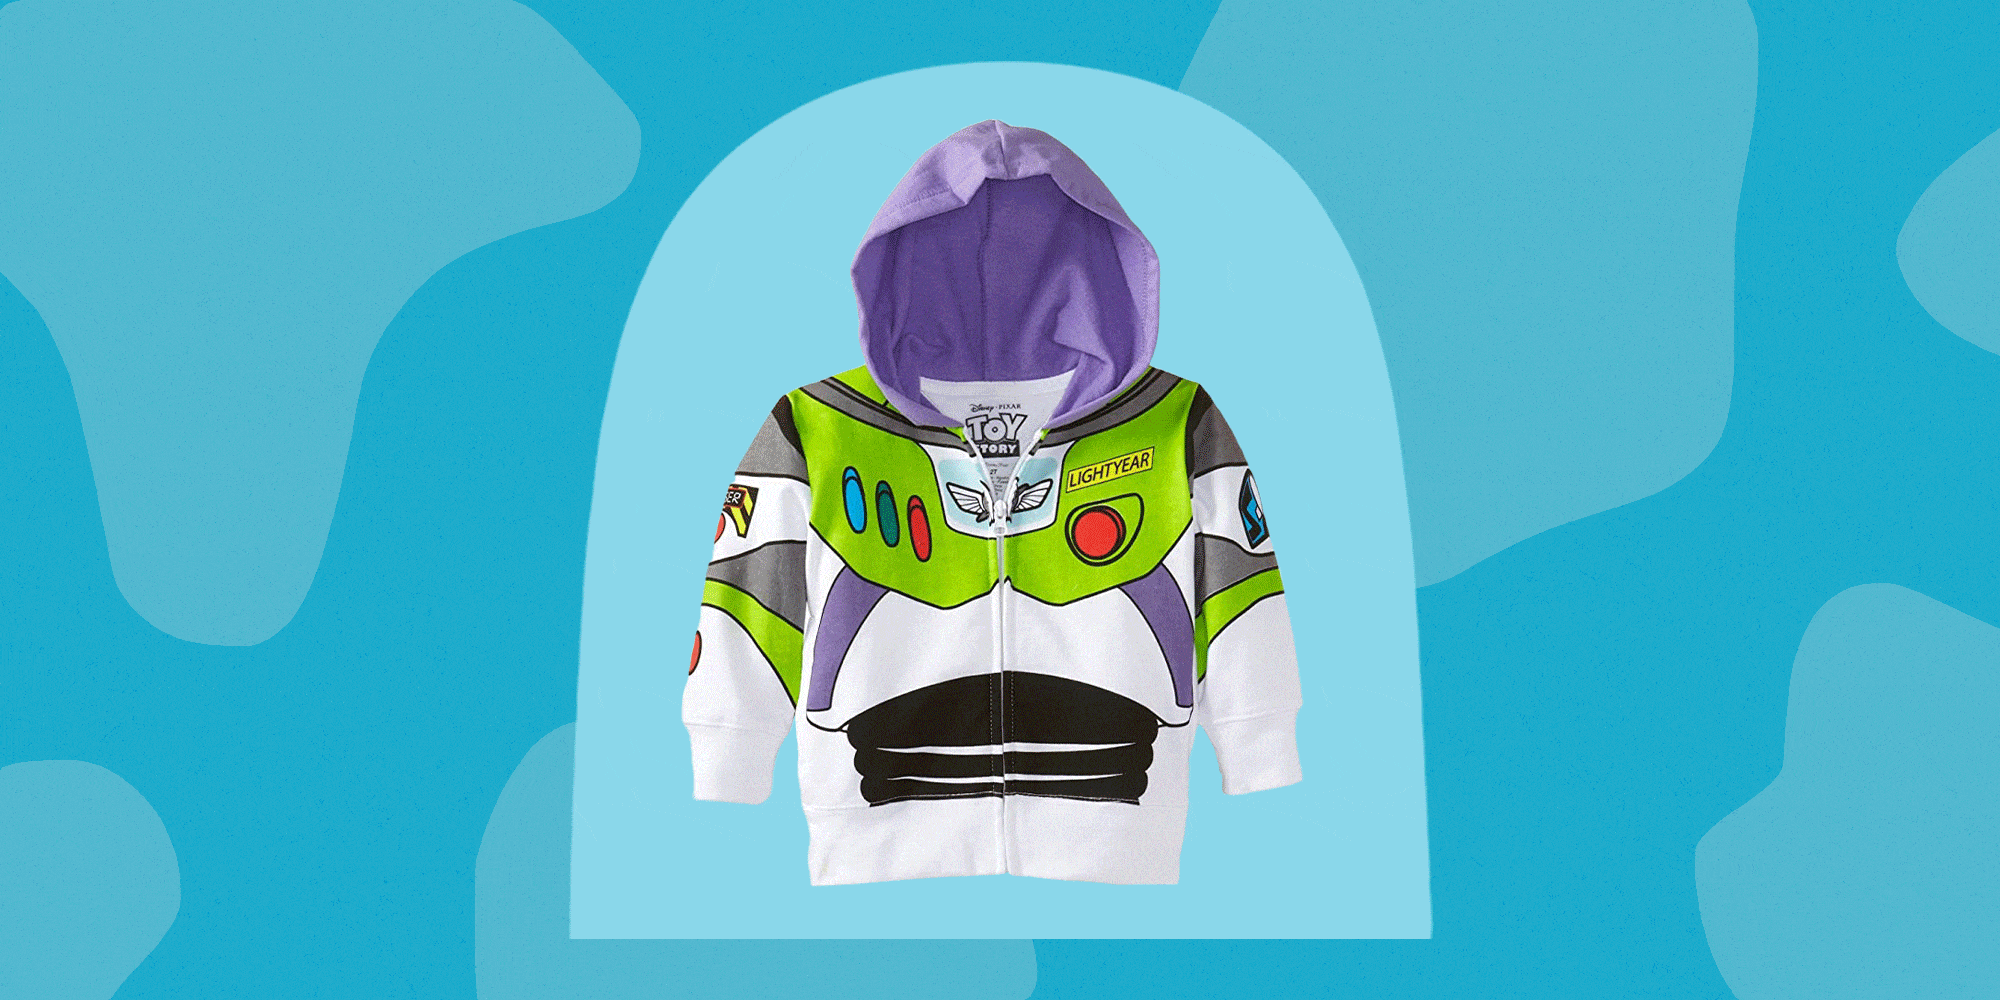 to infinity and beyond buzz lightyear gif